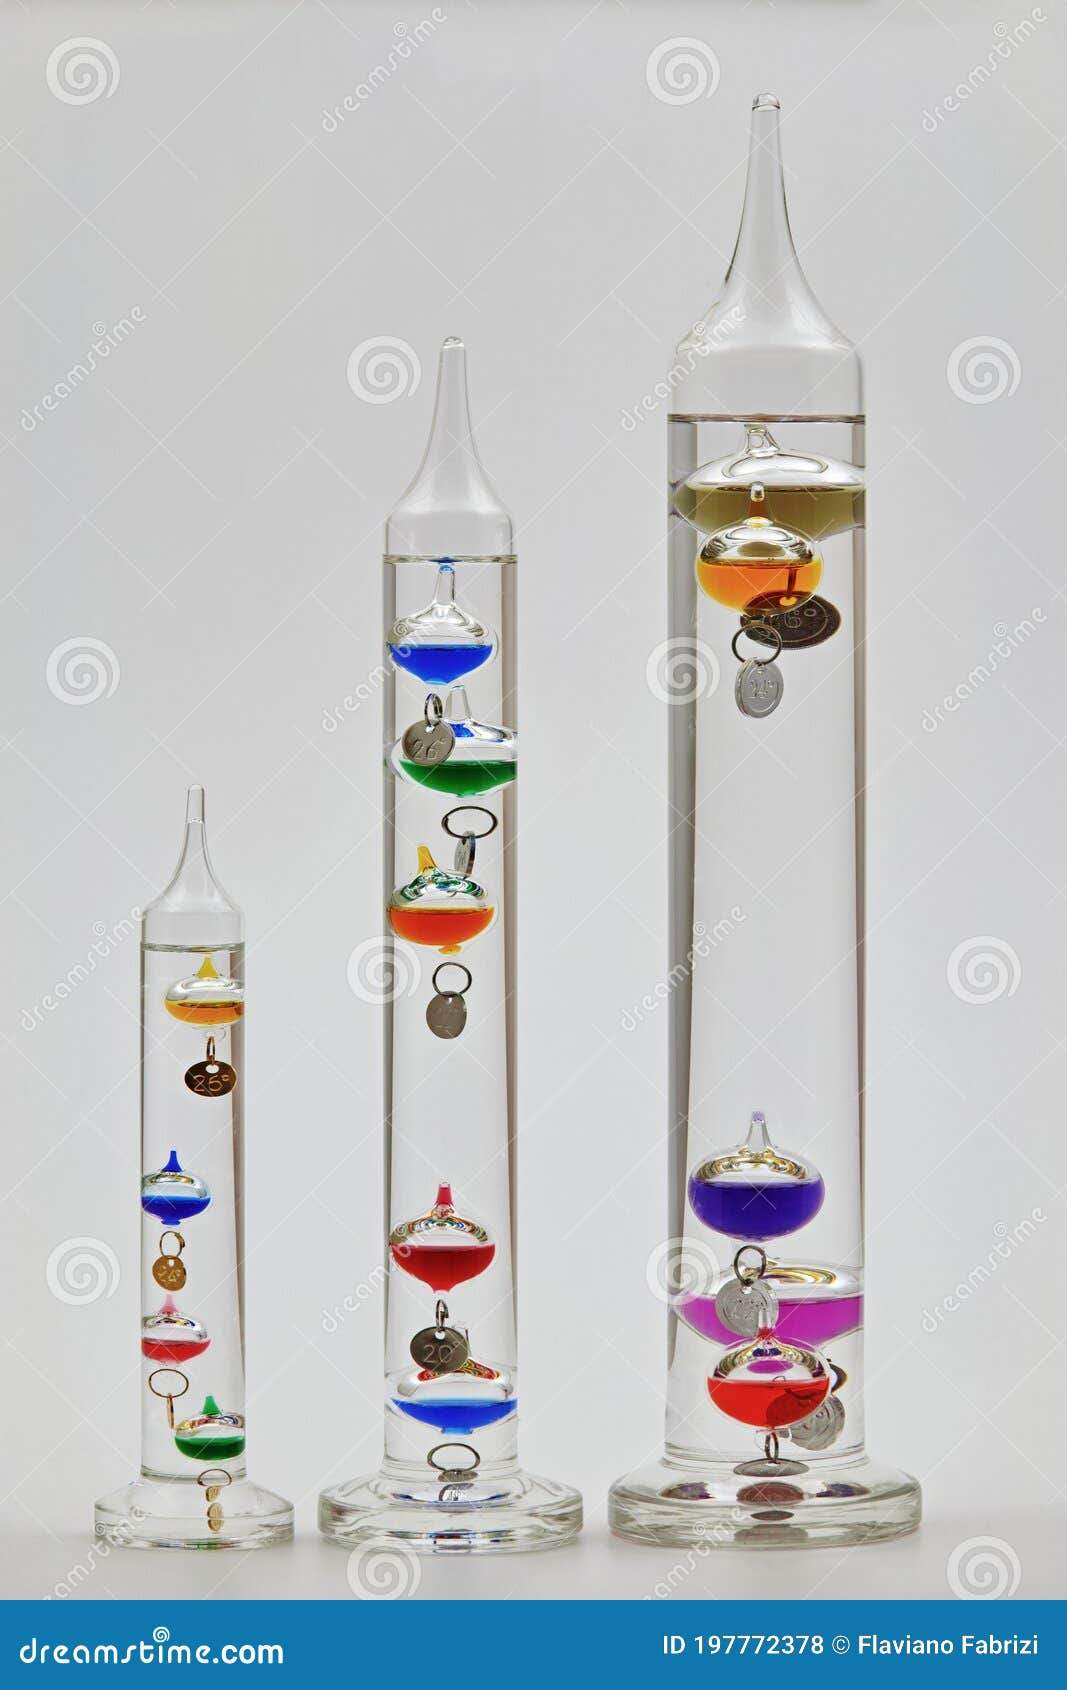 What Chemicals Are in a Galileo Thermometer?